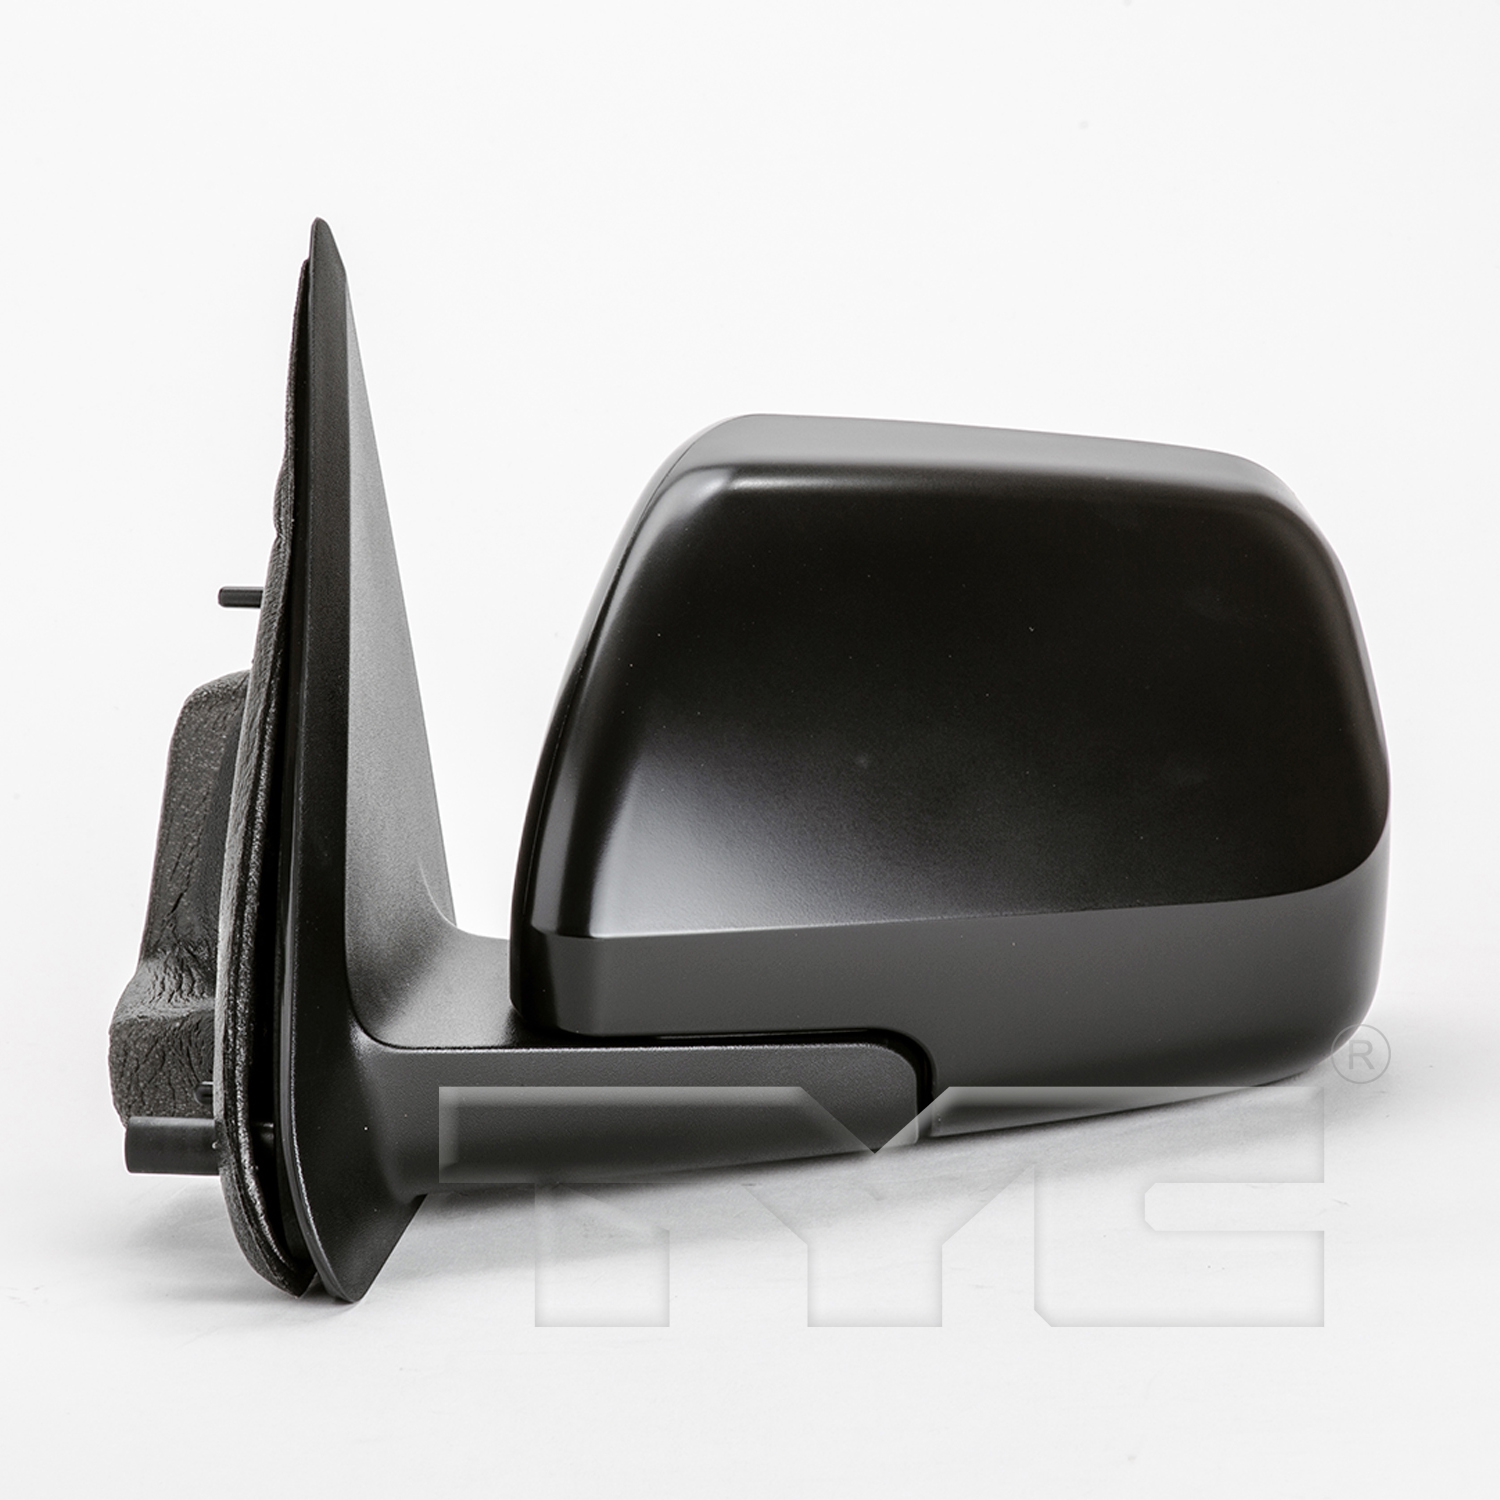 Aftermarket MIRRORS for MERCURY - MARINER, MARINER,08-09,LT Mirror outside rear view